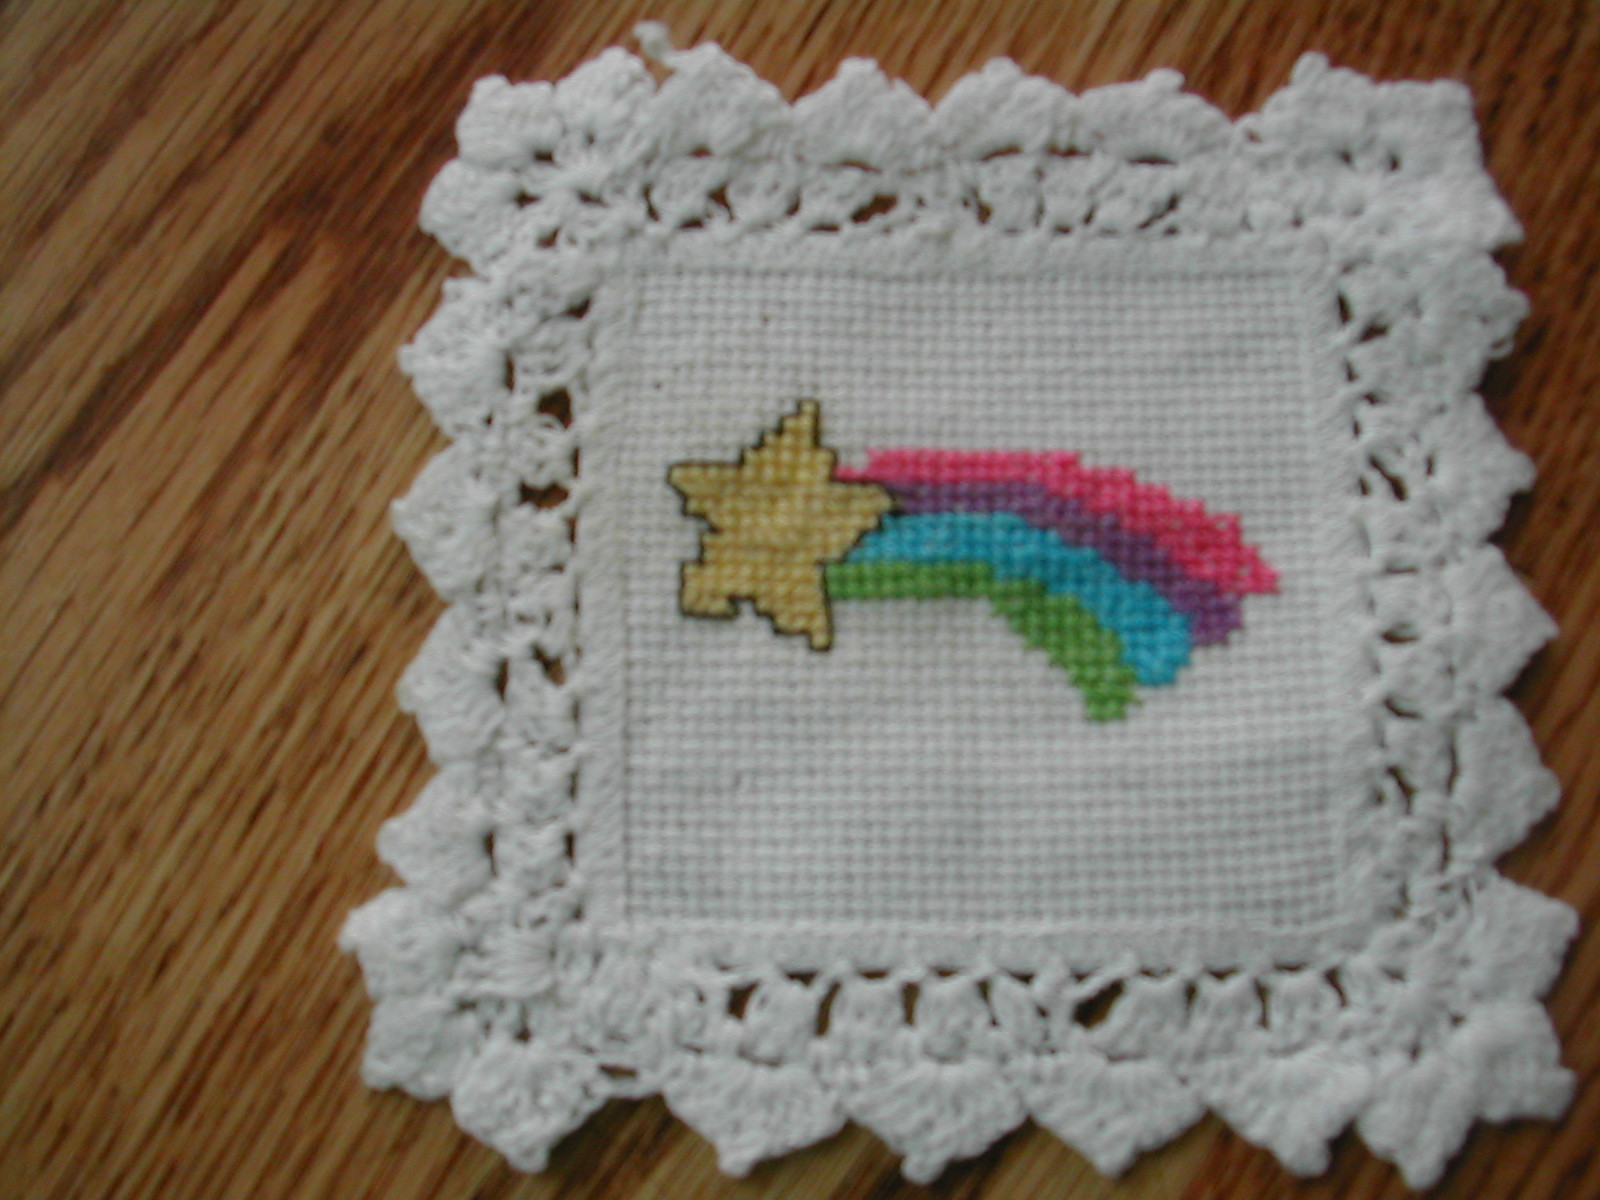 A Stitched Rainbow by moon_child2000